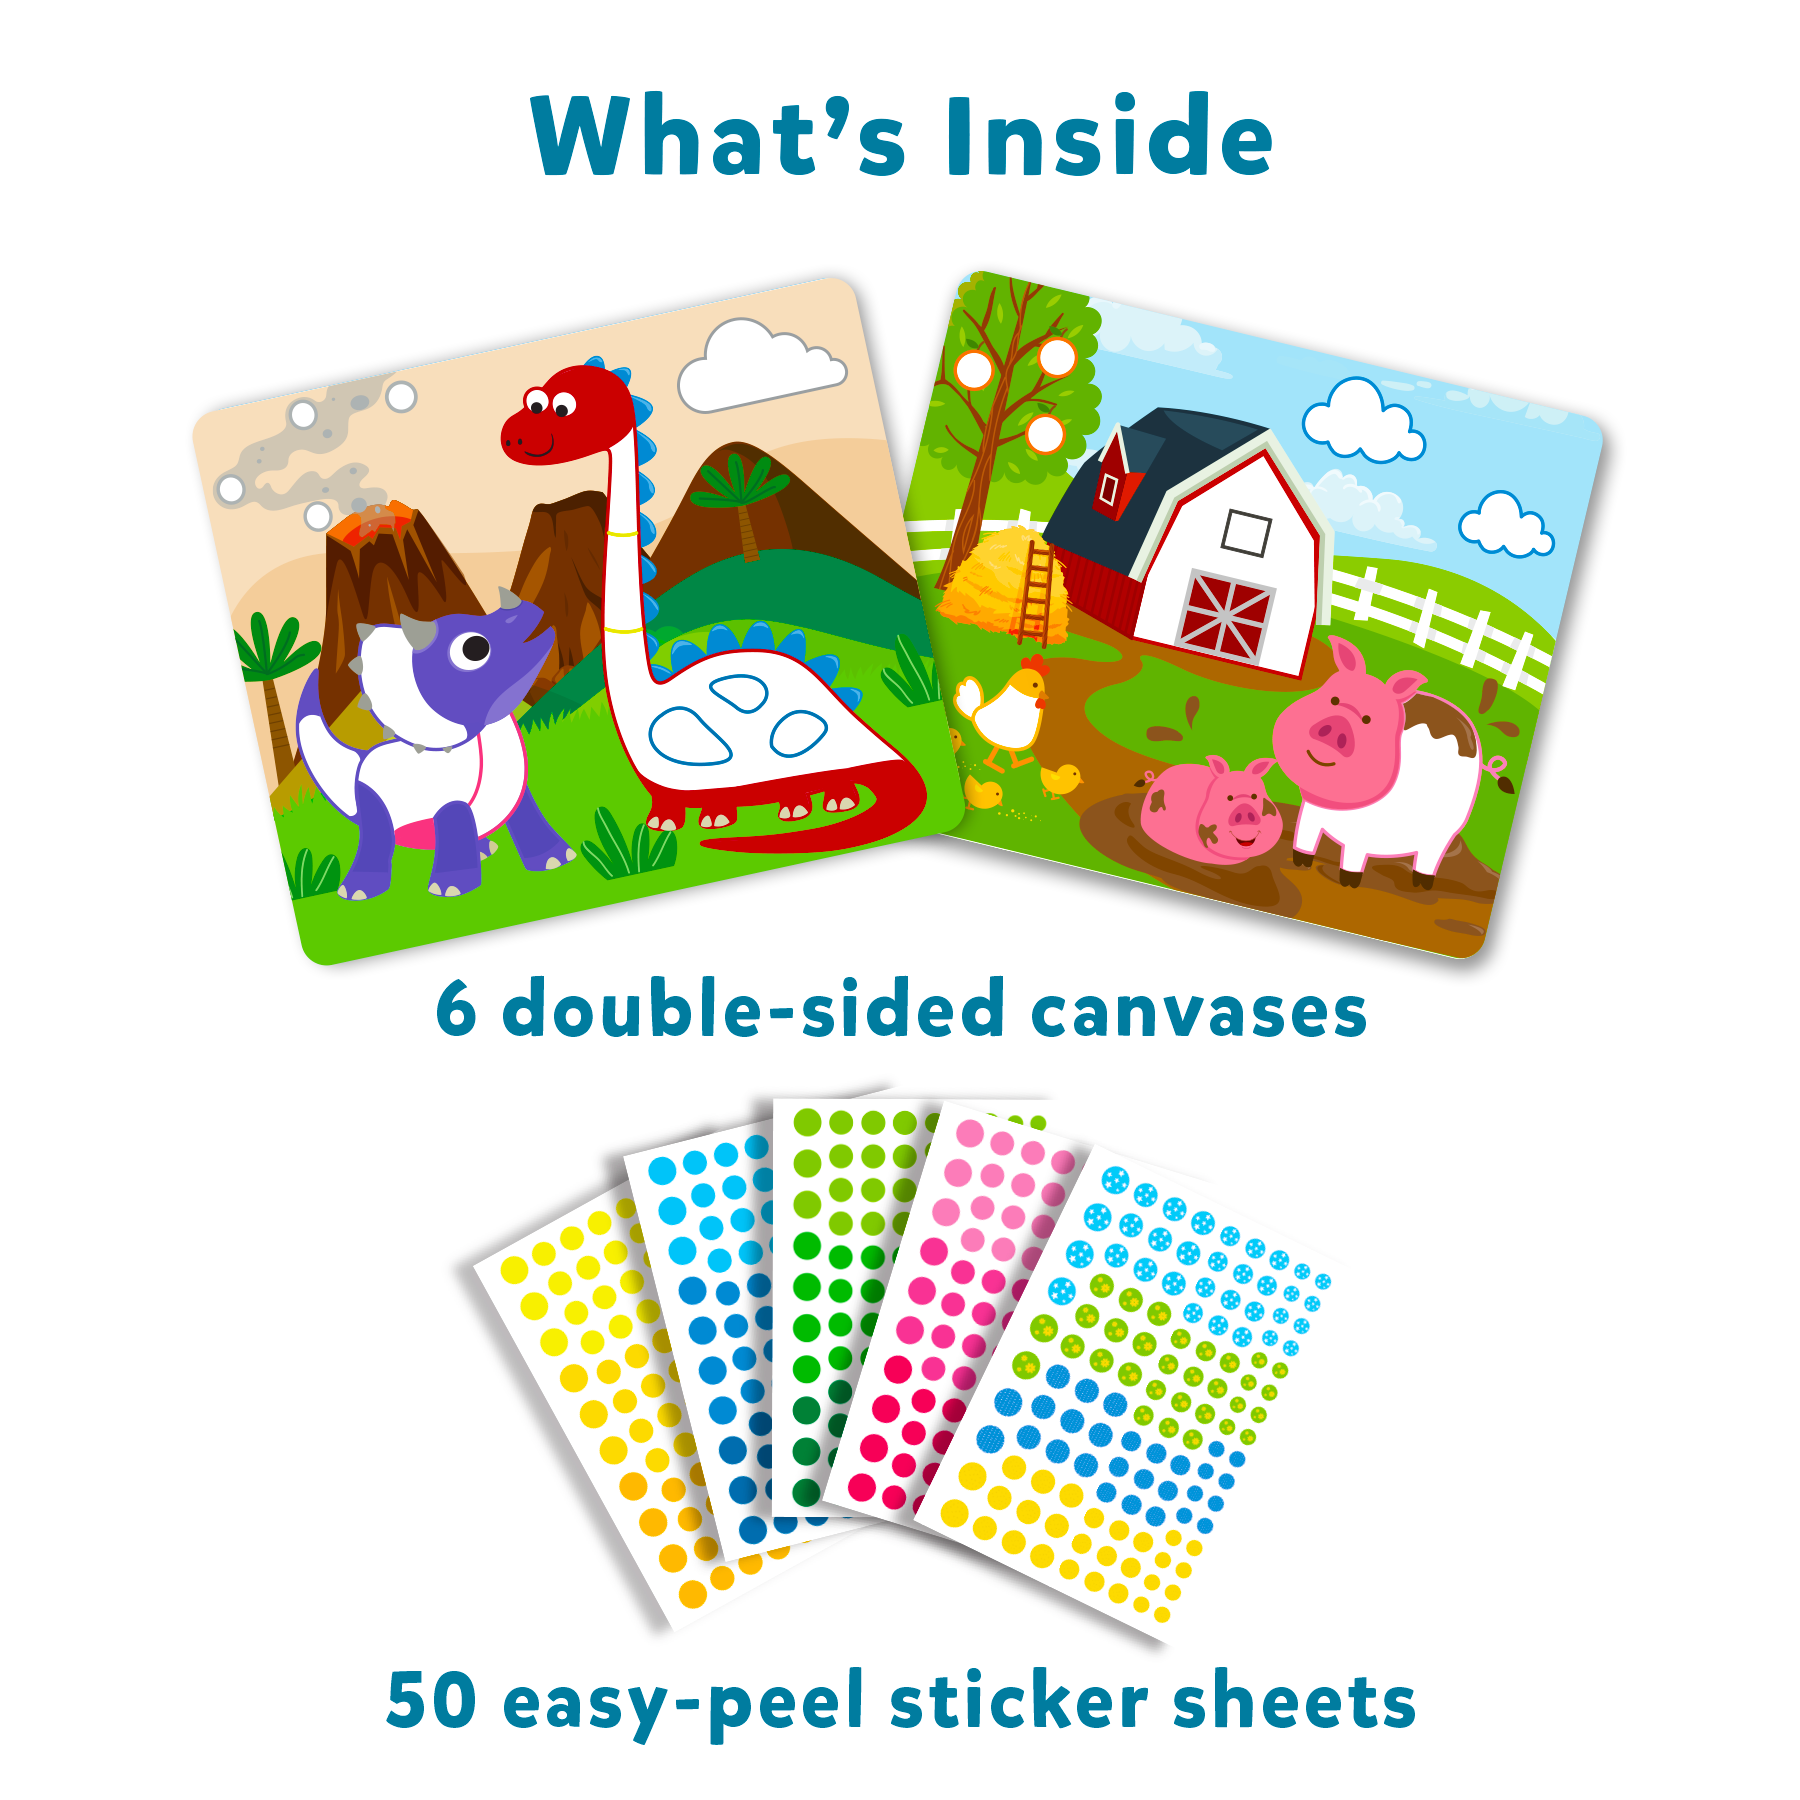 Skillmatics Art Activity : Dot it! Combo Pack - Complete 12 Animal & Dinosaur Themed Pictures